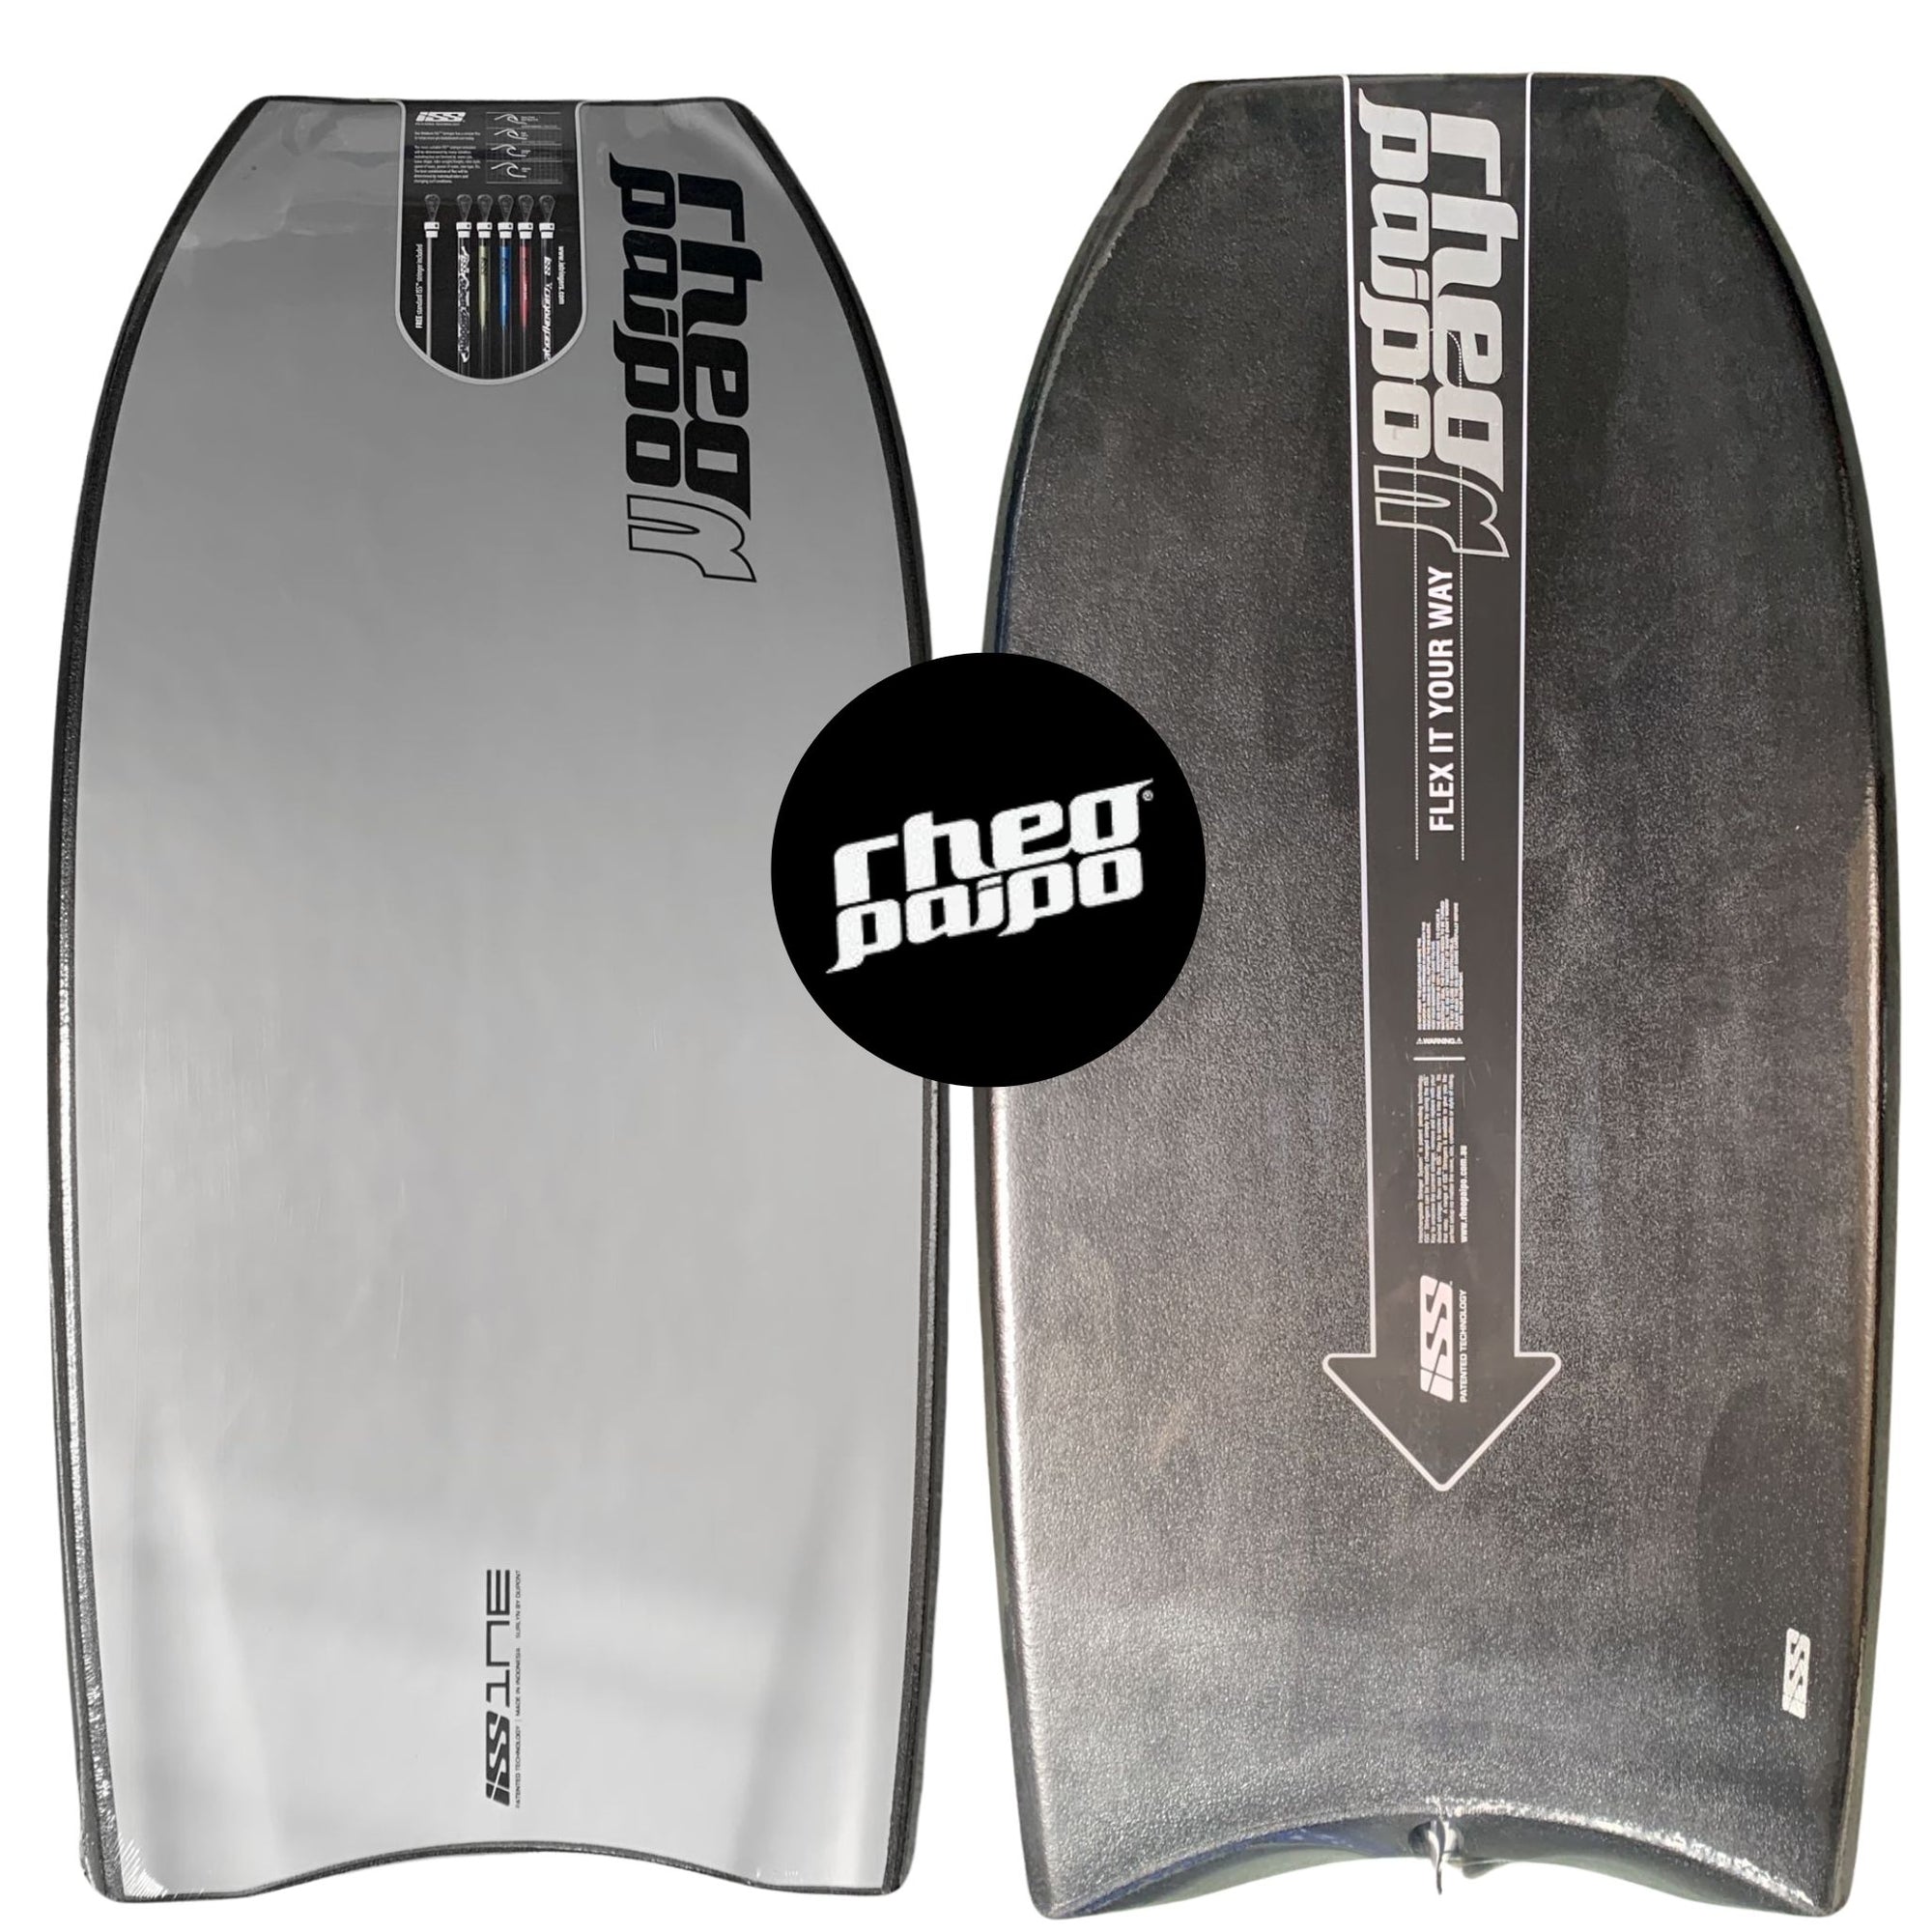 RheoPaipo ISS Body Board | SILVER/BLACK | PP KINETIC CORE | 1NE | 40" - South East Clearance Centre